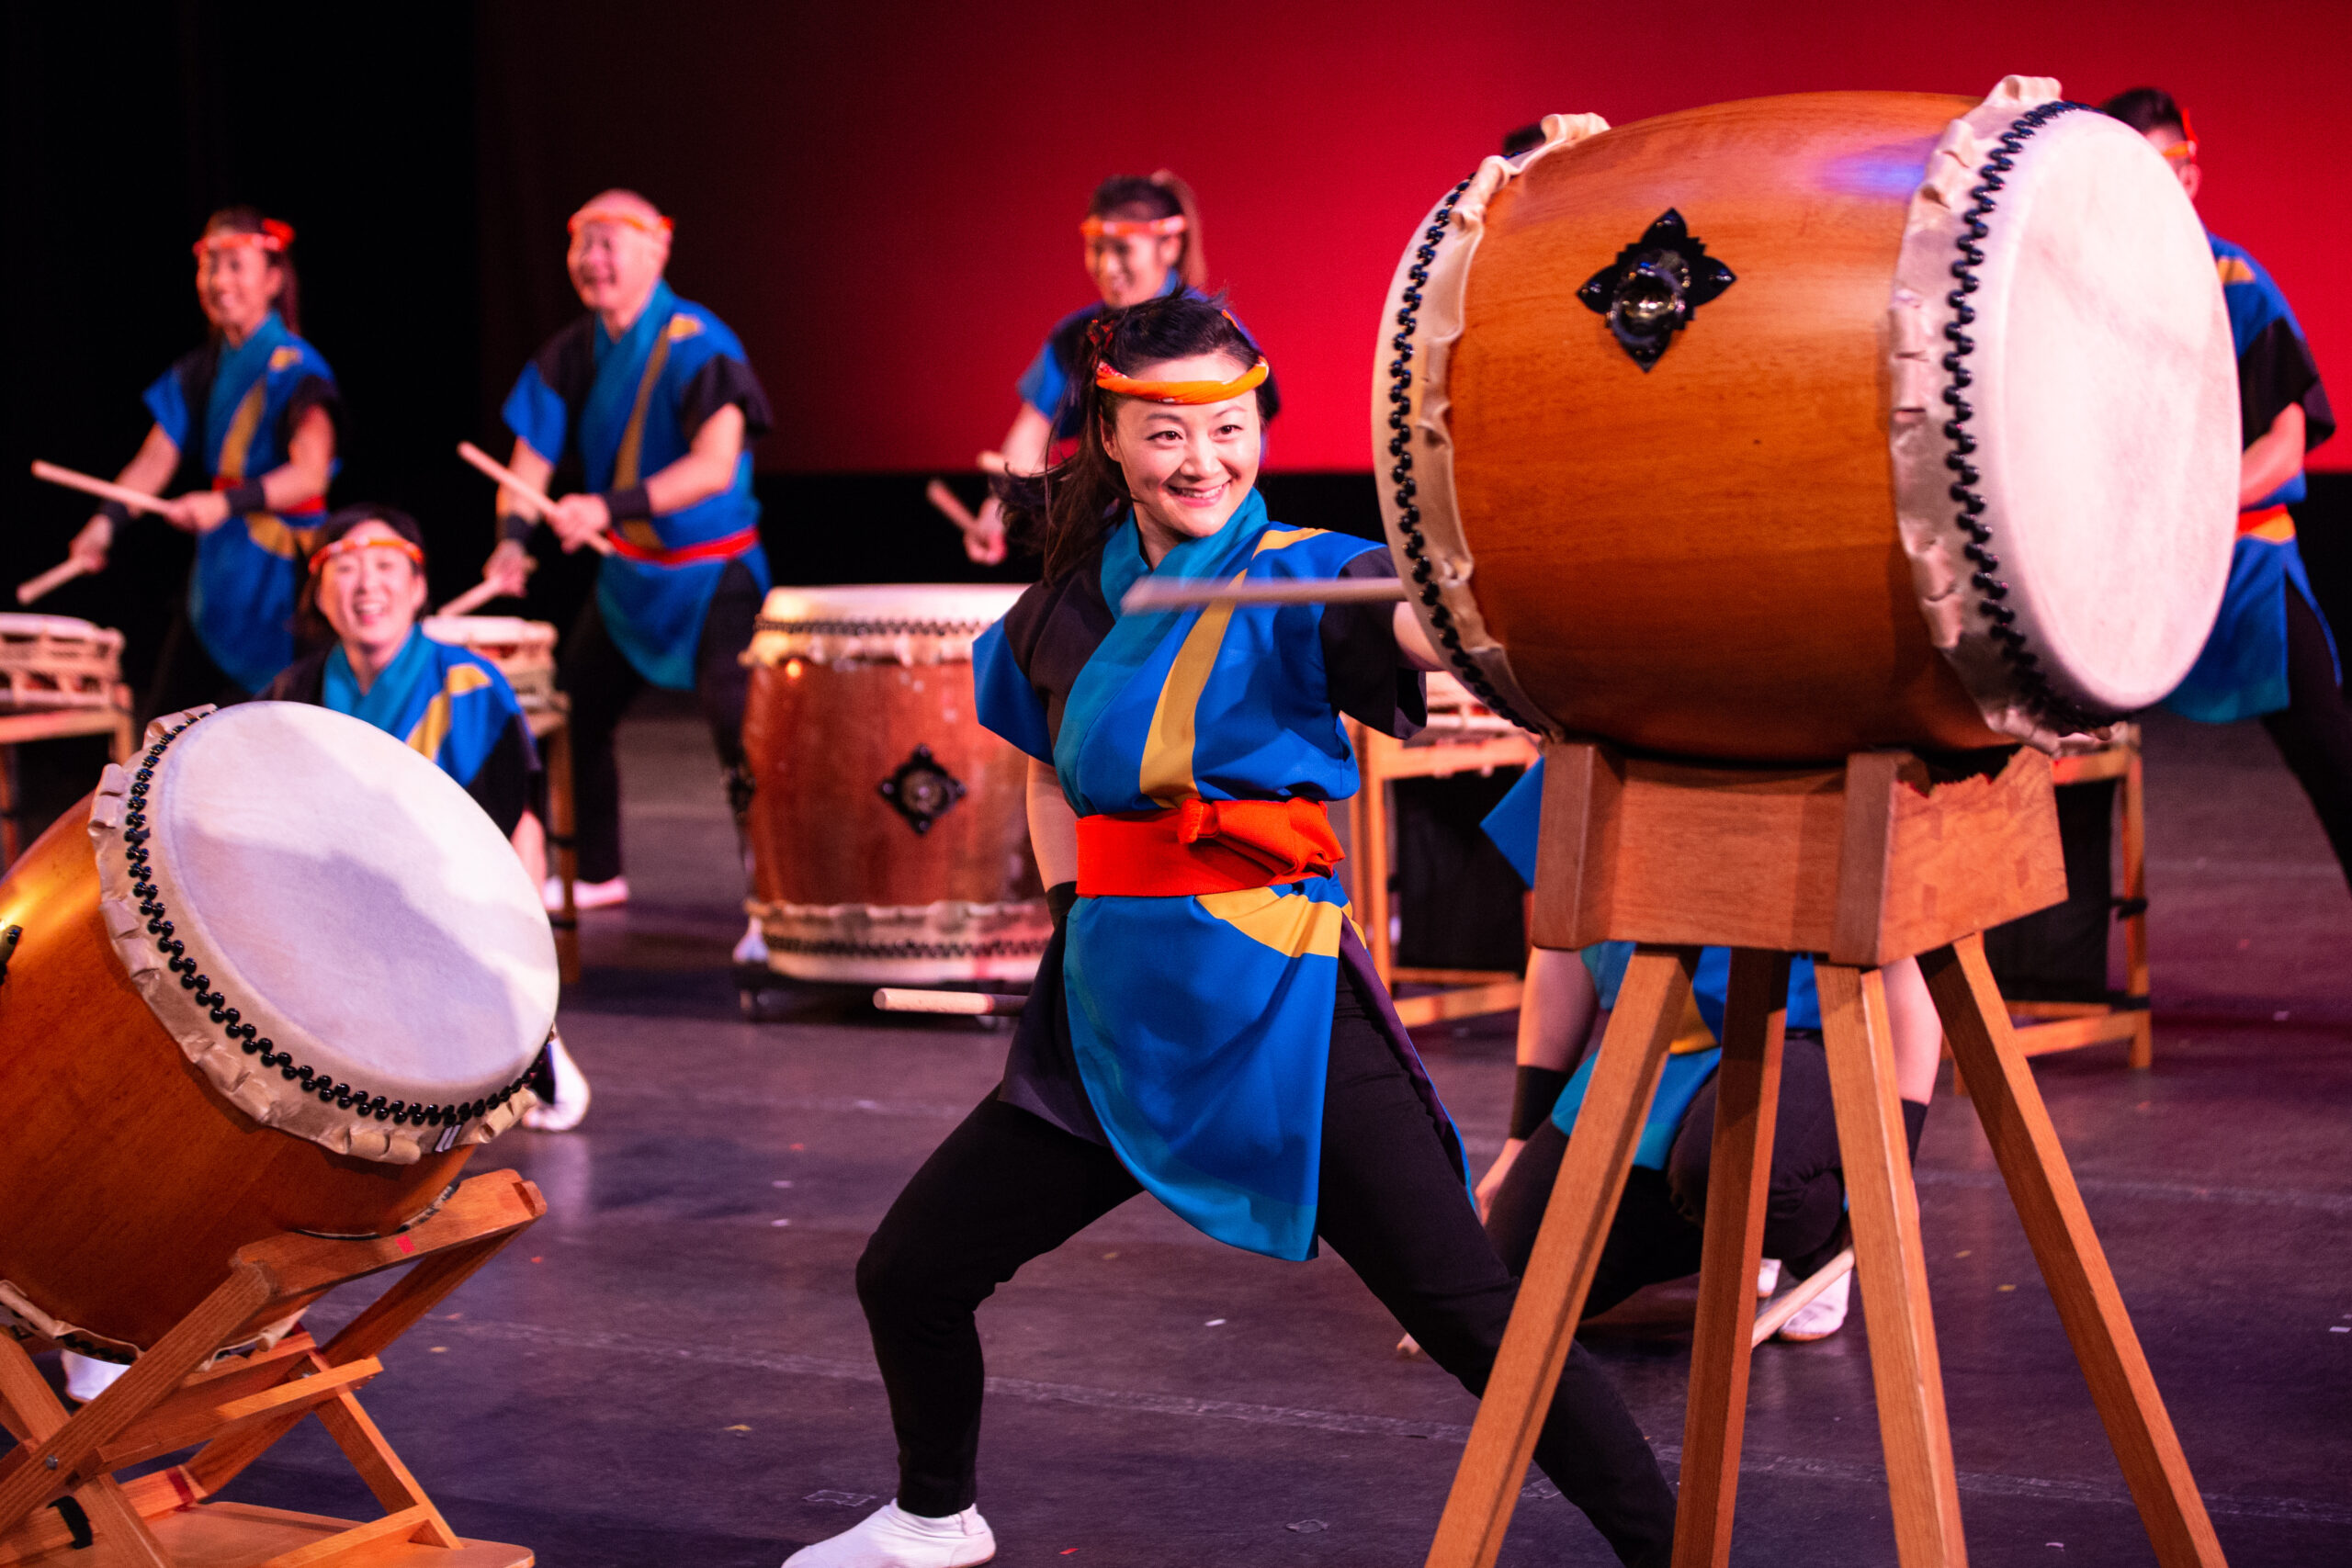 Color photo of traditionally dressed drummers playing large drums on a stage.